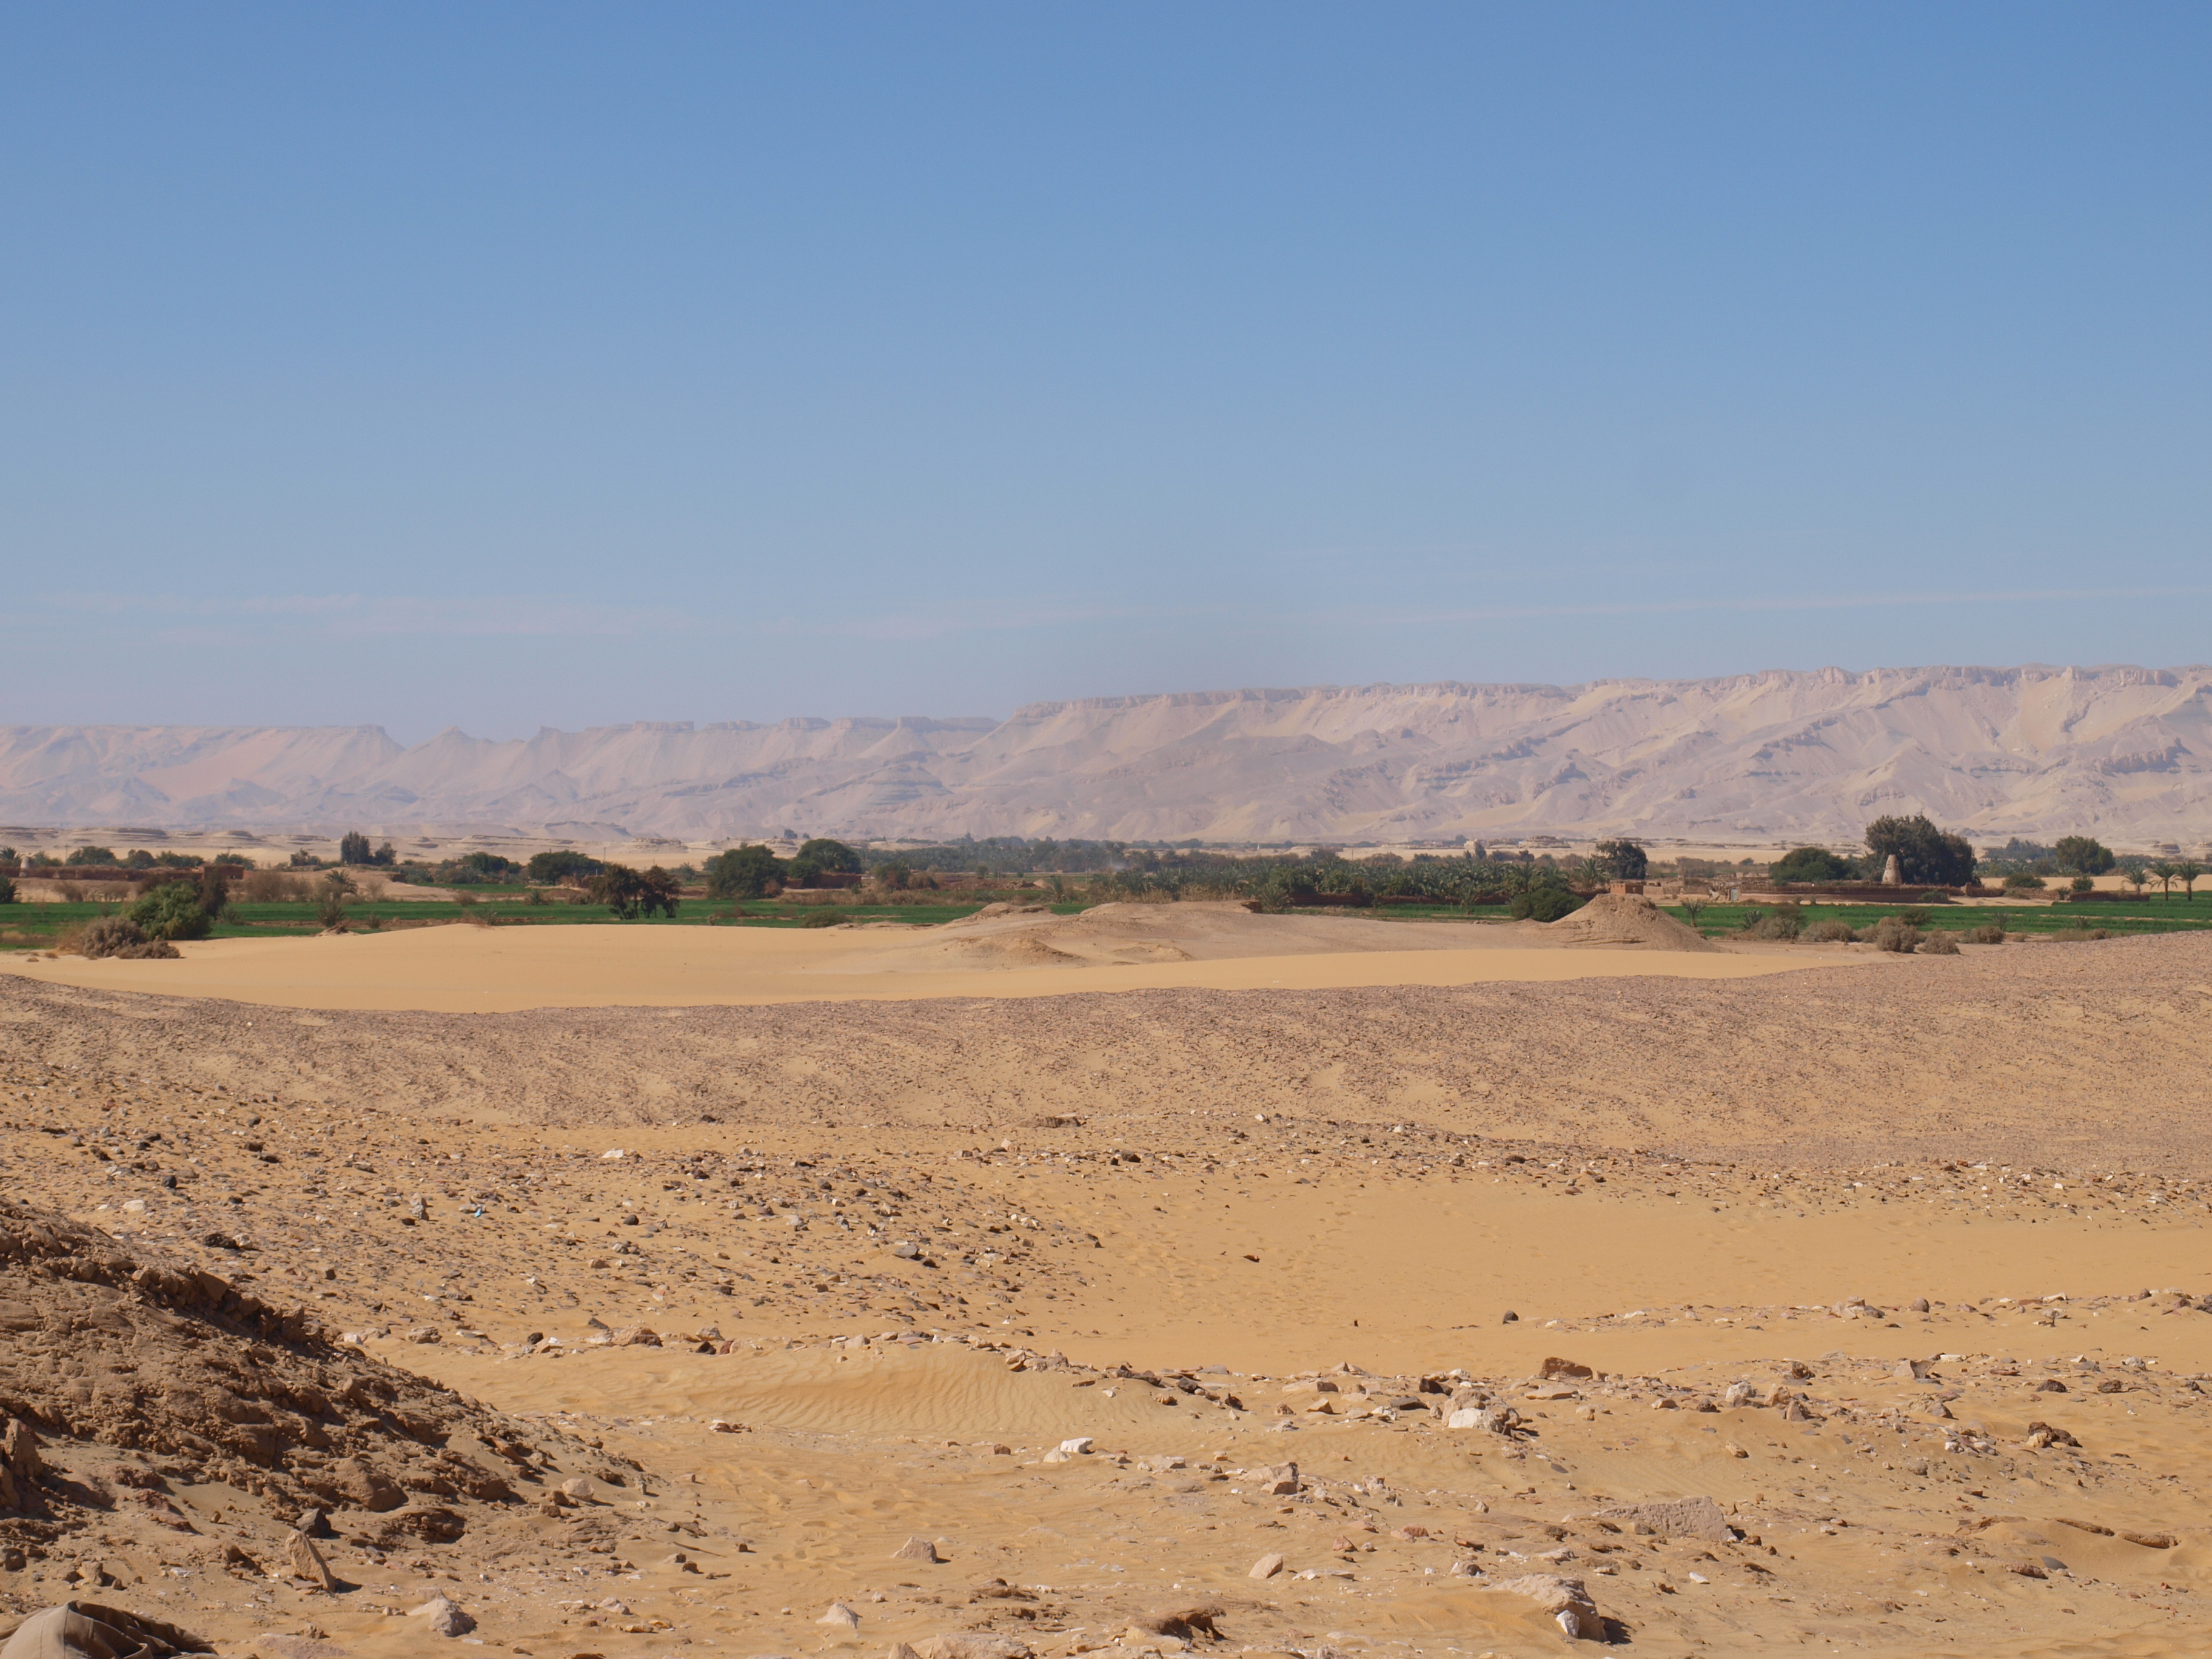 Landscape view of the site of Amheida. The foreground shows scatters ceramics and agricultural fields. The escarpment is visible in the background.